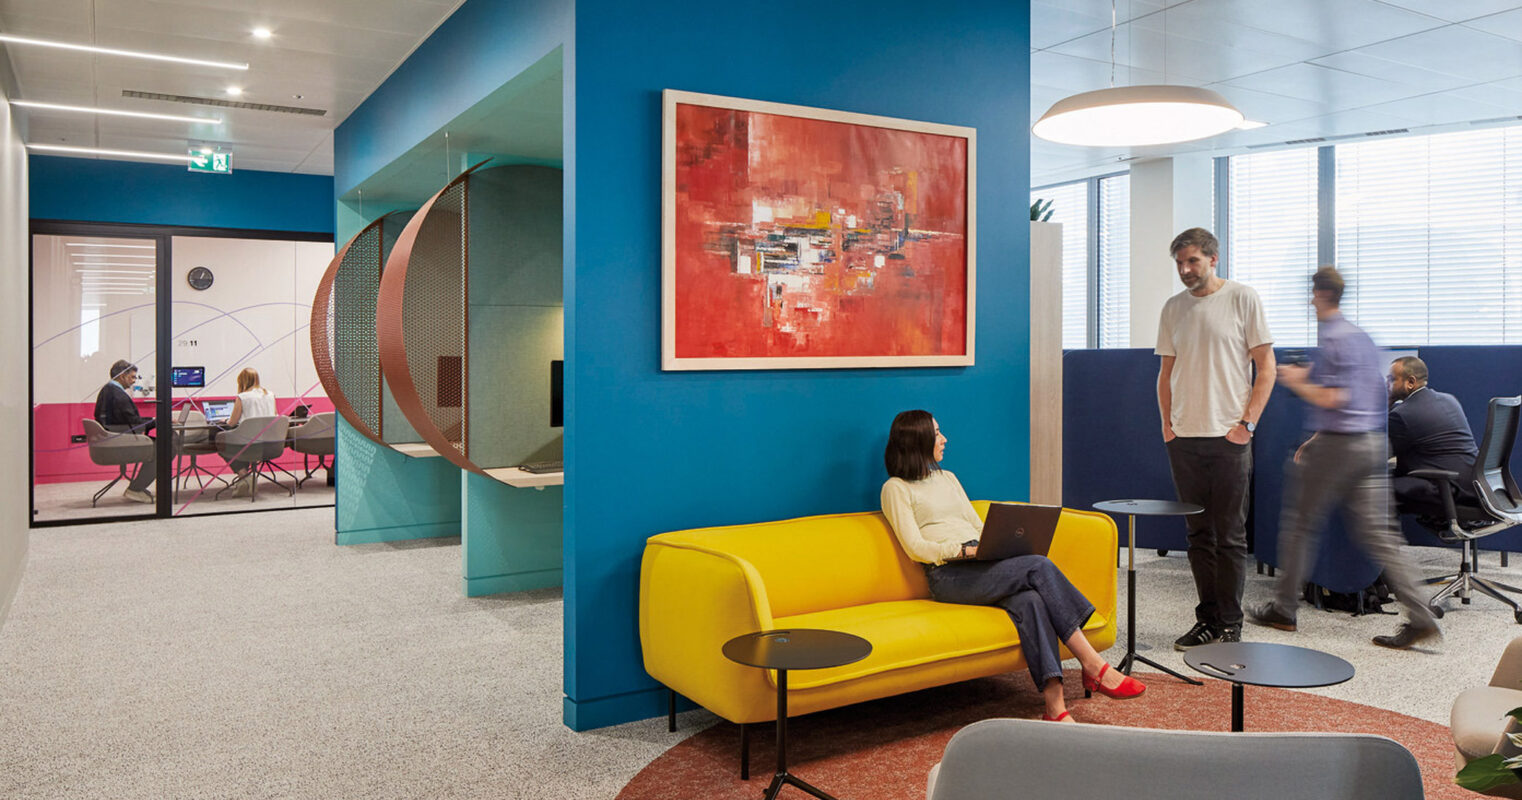 Vibrant modern office space featuring an eclectic mix of geometric shapes and bold colors. A circular cutout connects two areas, with employees engaging nearby. Artwork on blue accent wall complements a yellow sofa, while a gray armchair offers contrast, embodying a dynamic and creative work environment.